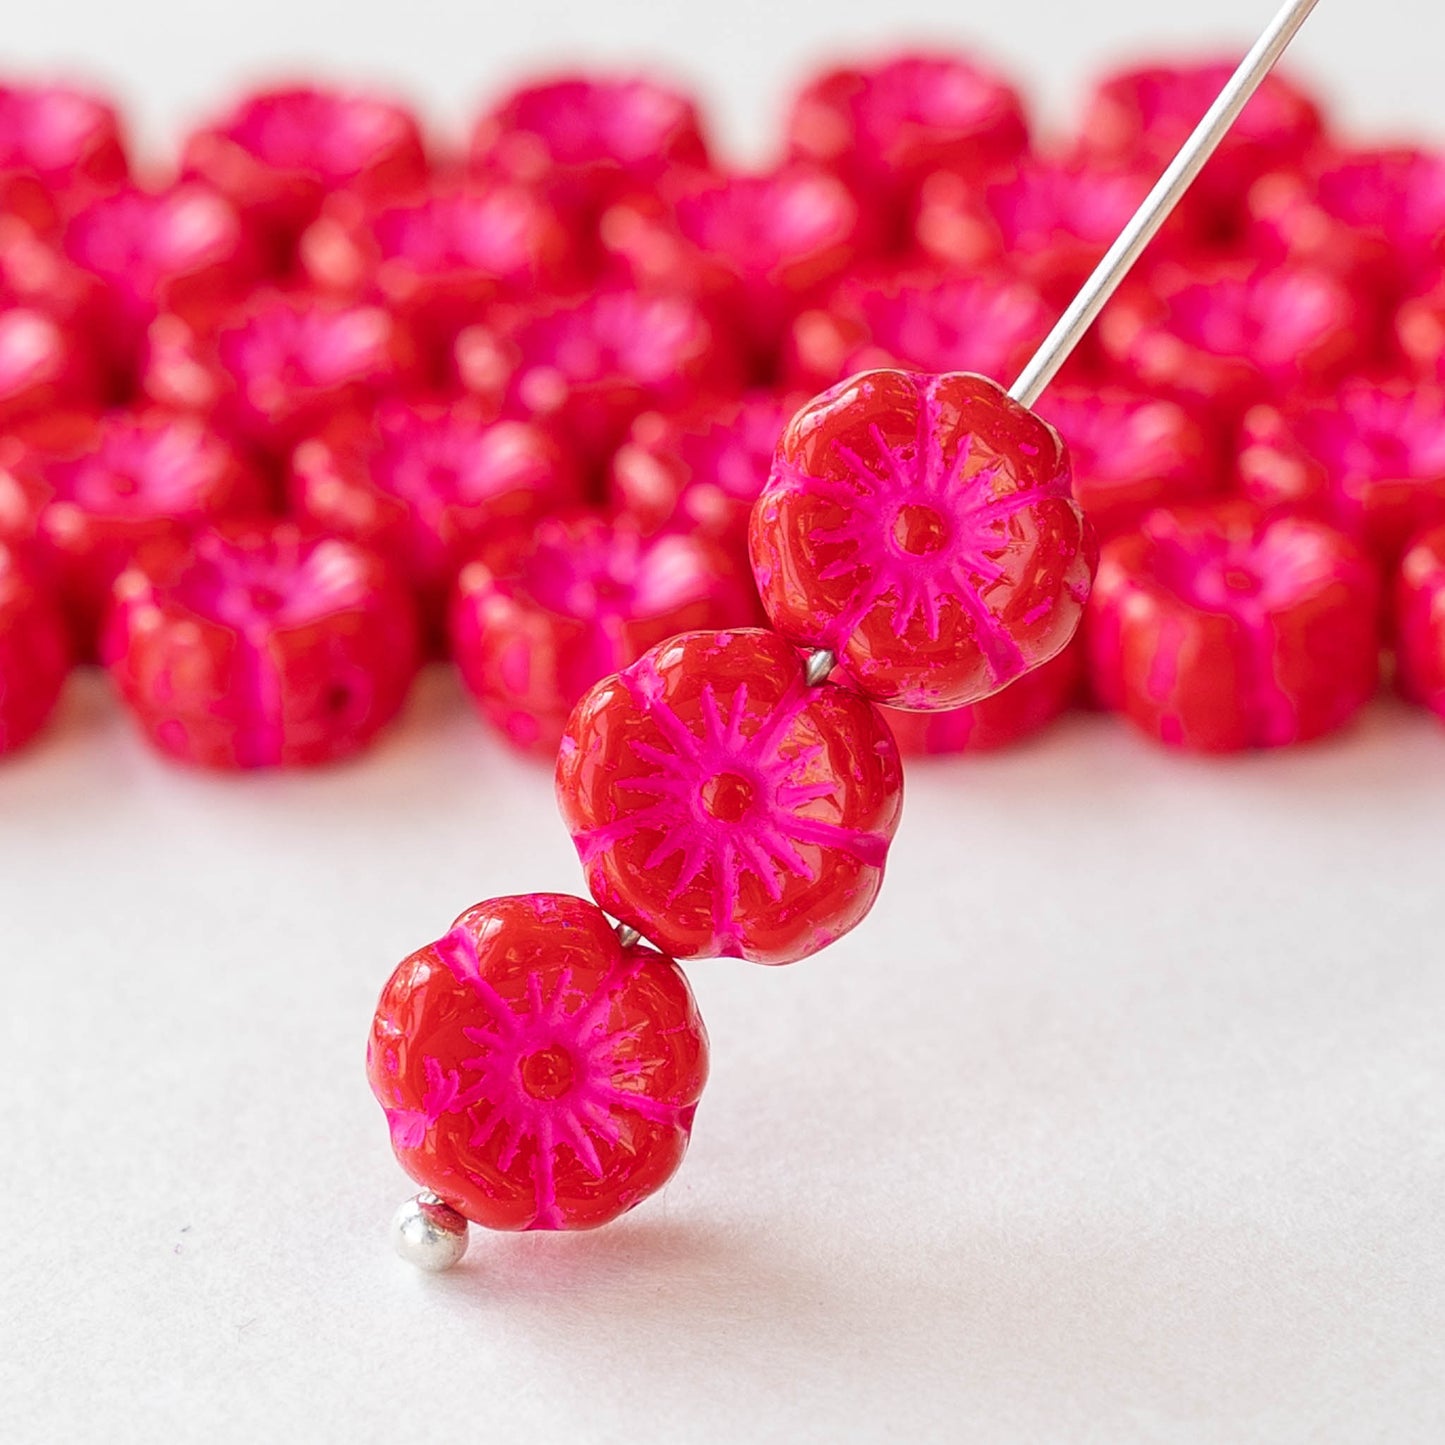 8mm Glass Flower Beads - Red with Pink Wash - 20 beads